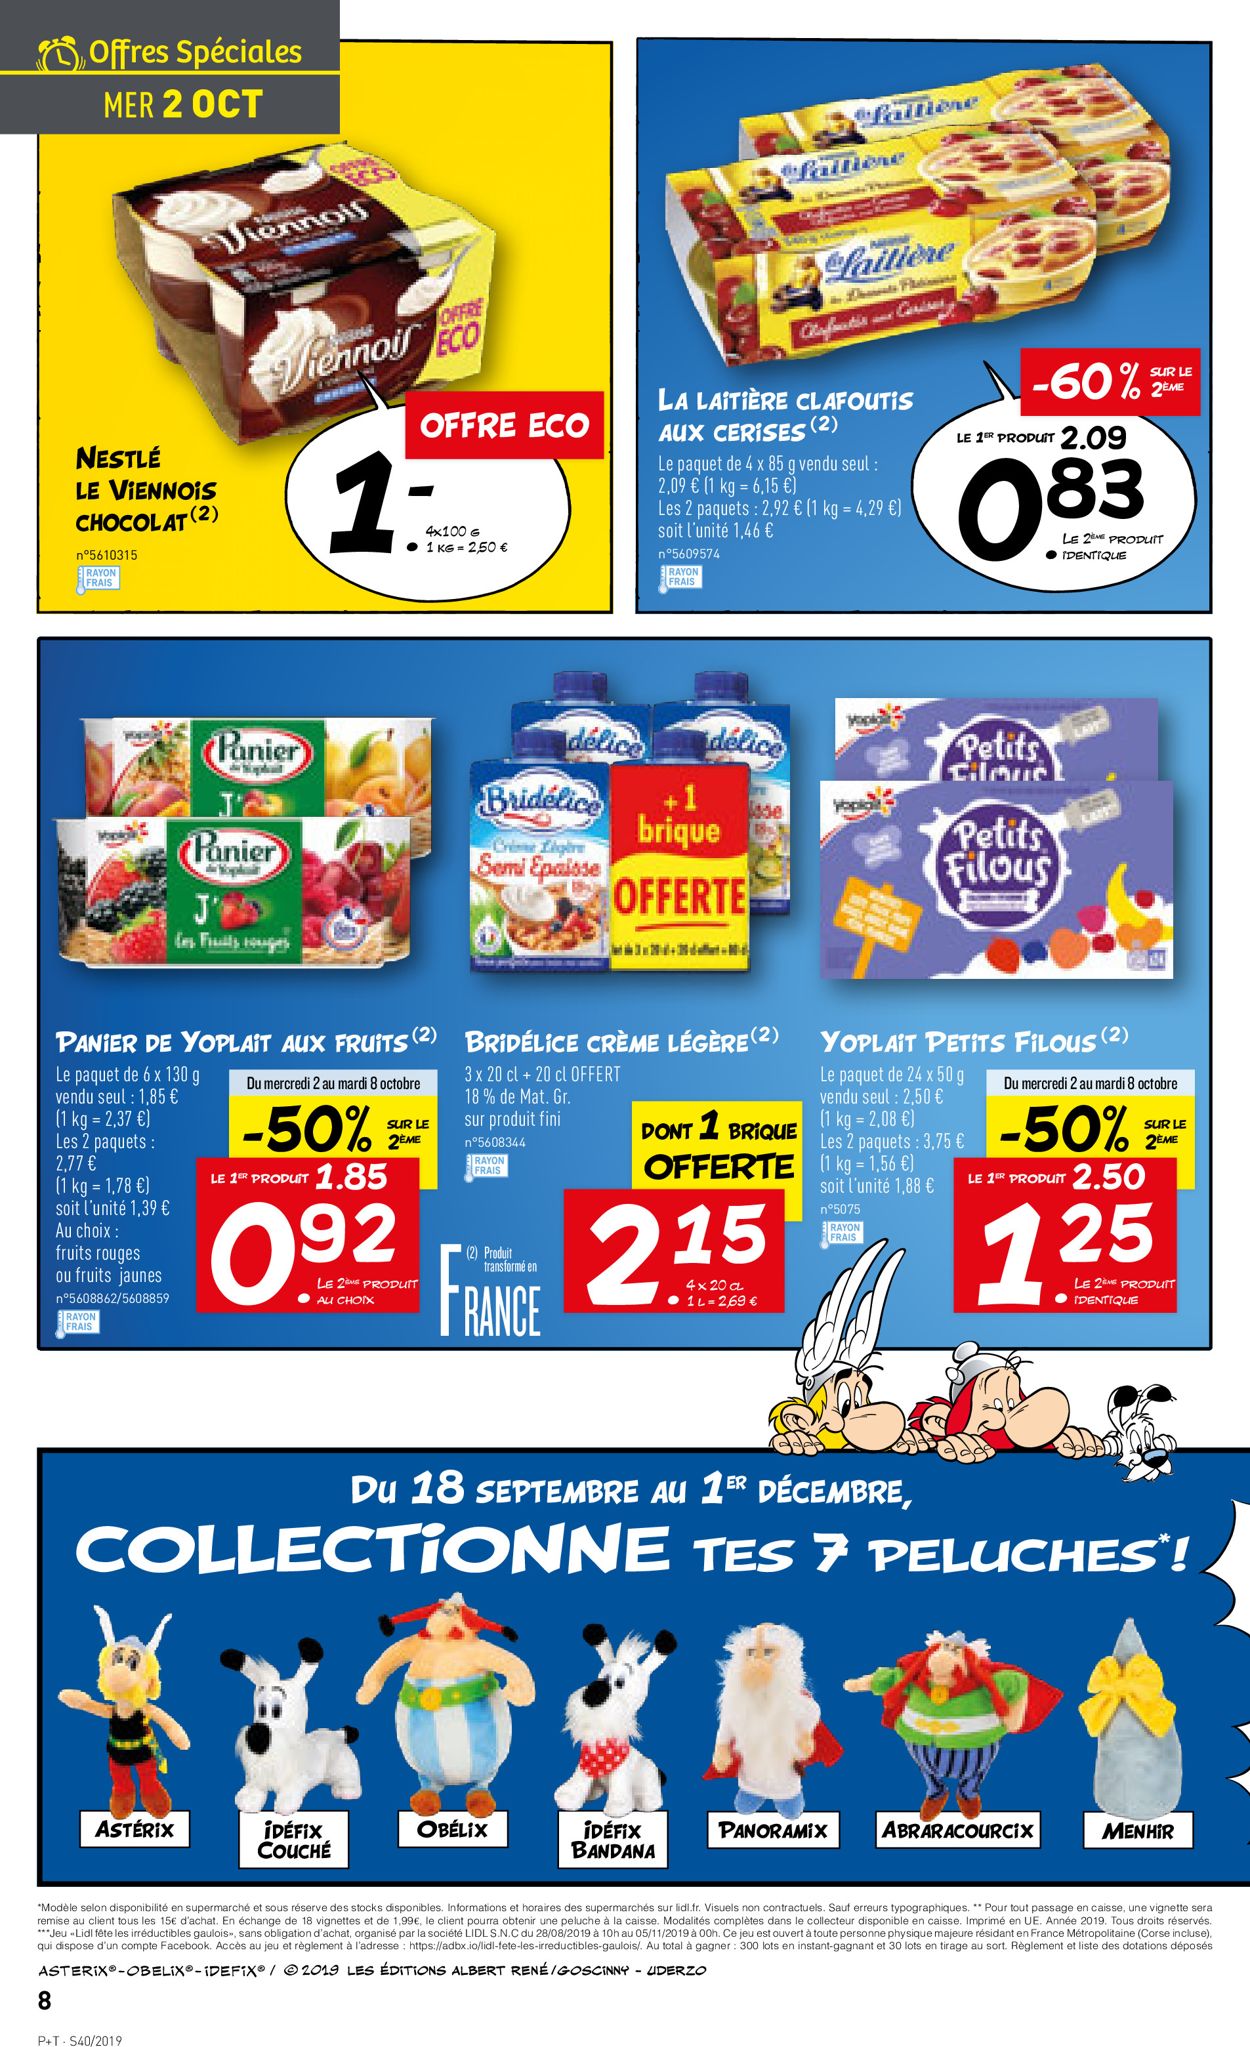 Lidl Catalogue - 02.10-08.10.2019 (Page 8)